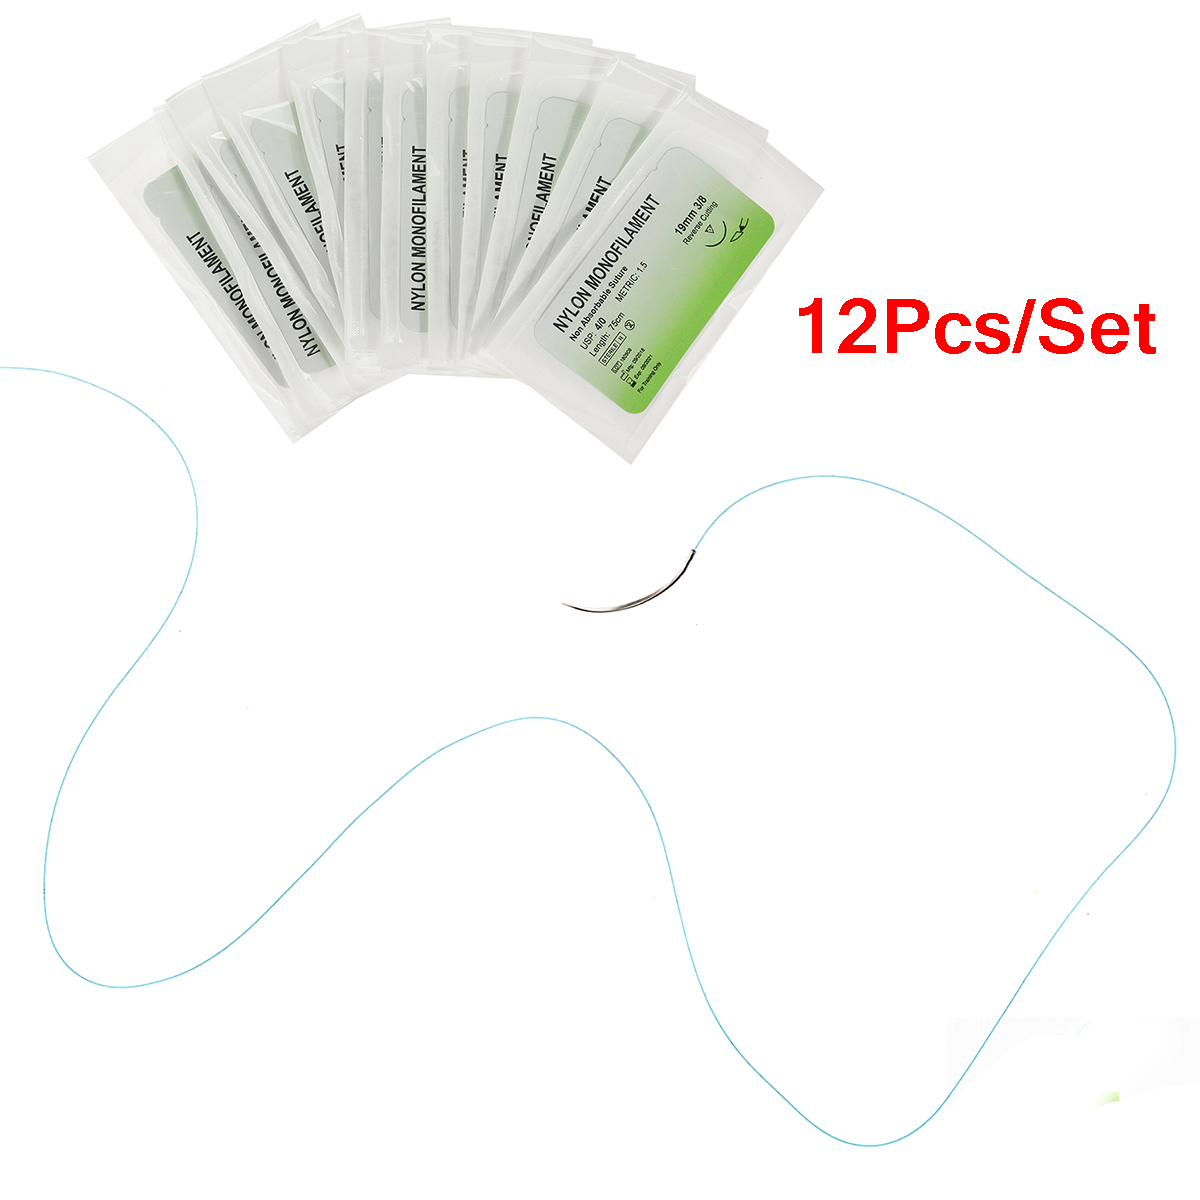 25-In-1-Skin-Suture-Surgical-Training-Kit-Silicone-Pad-Needle-Scissors-Tools-Kit-1417313-7